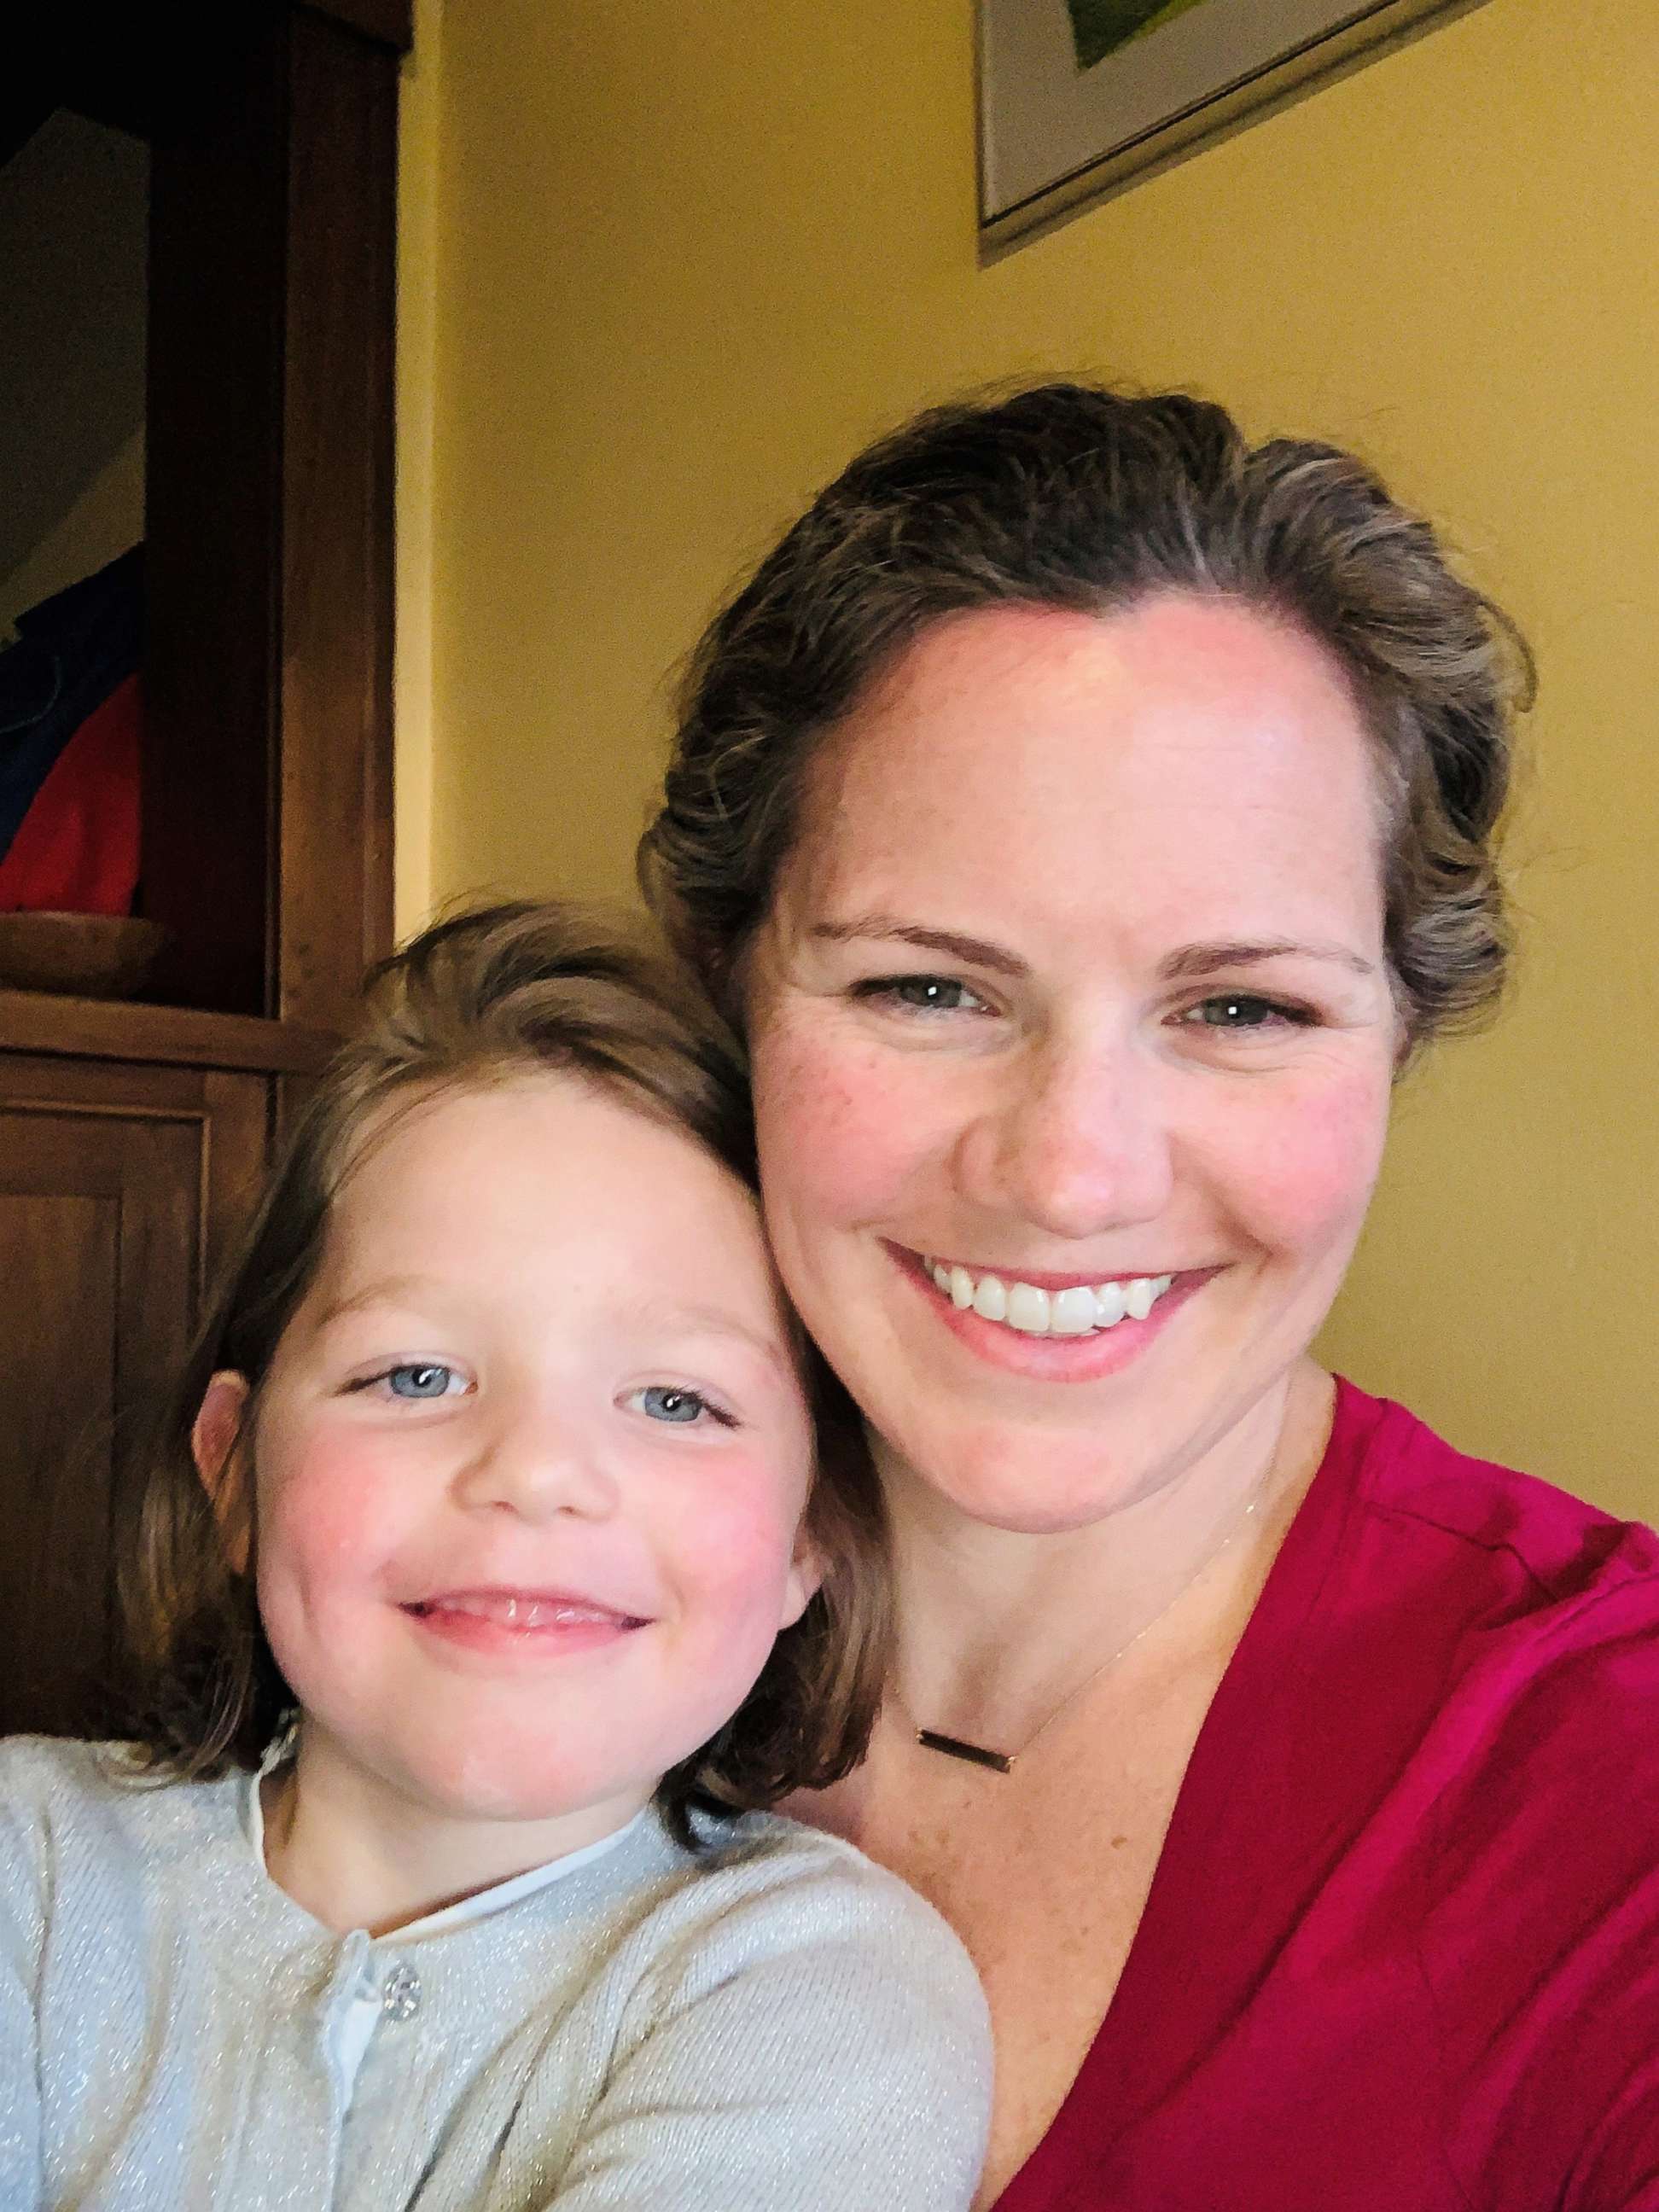 PHOTO: Dr. Meghan Candee of Salt Lake City was stunned when a plastic surgeon charged her insurance company more than $25,000 for a single stitch after daughter Maeve cut her face in a fall.